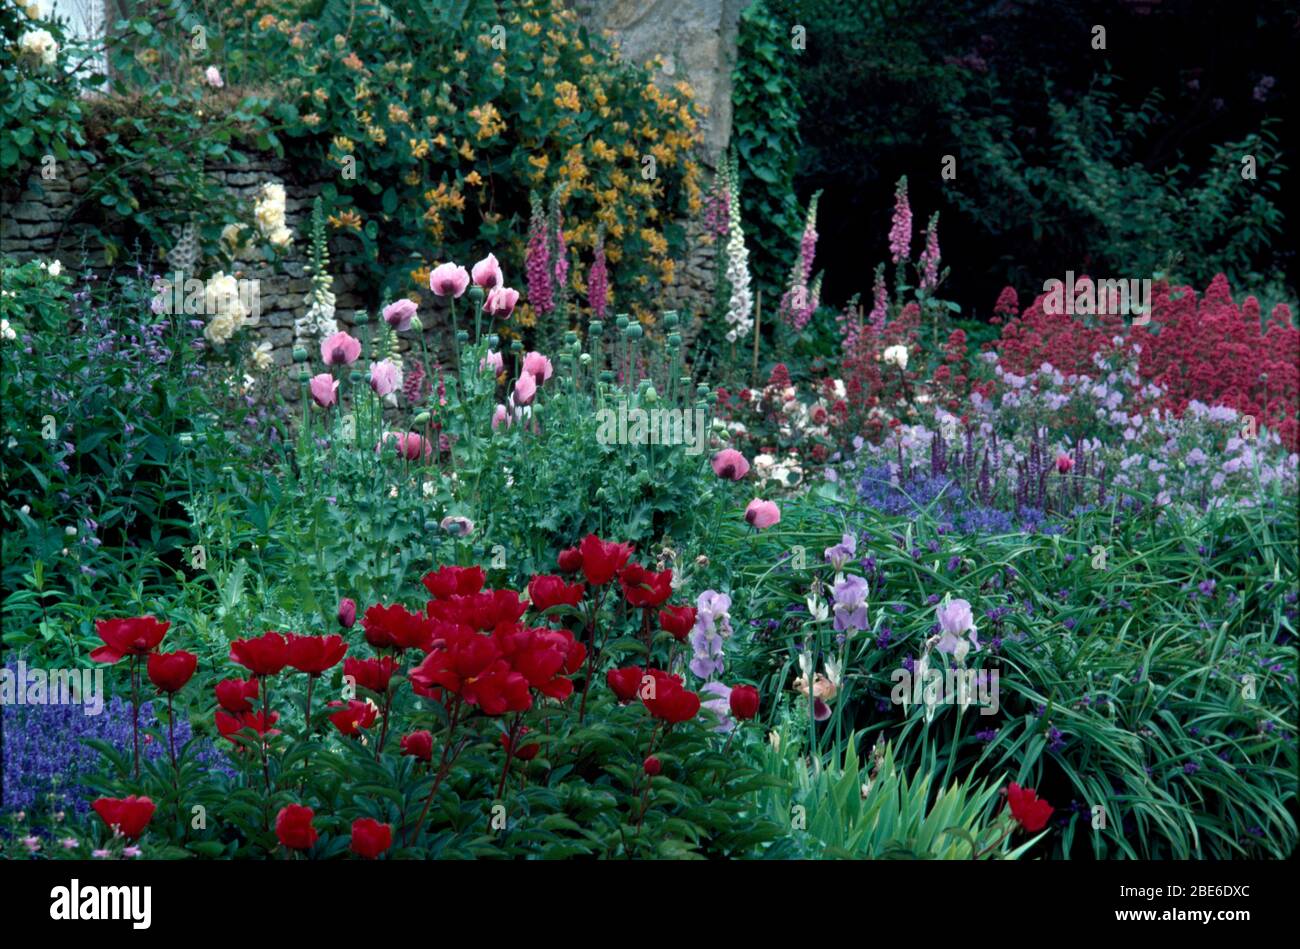 Red peonies and pale pink oriental poppies in large herbaceous border with blue irises Stock Photo